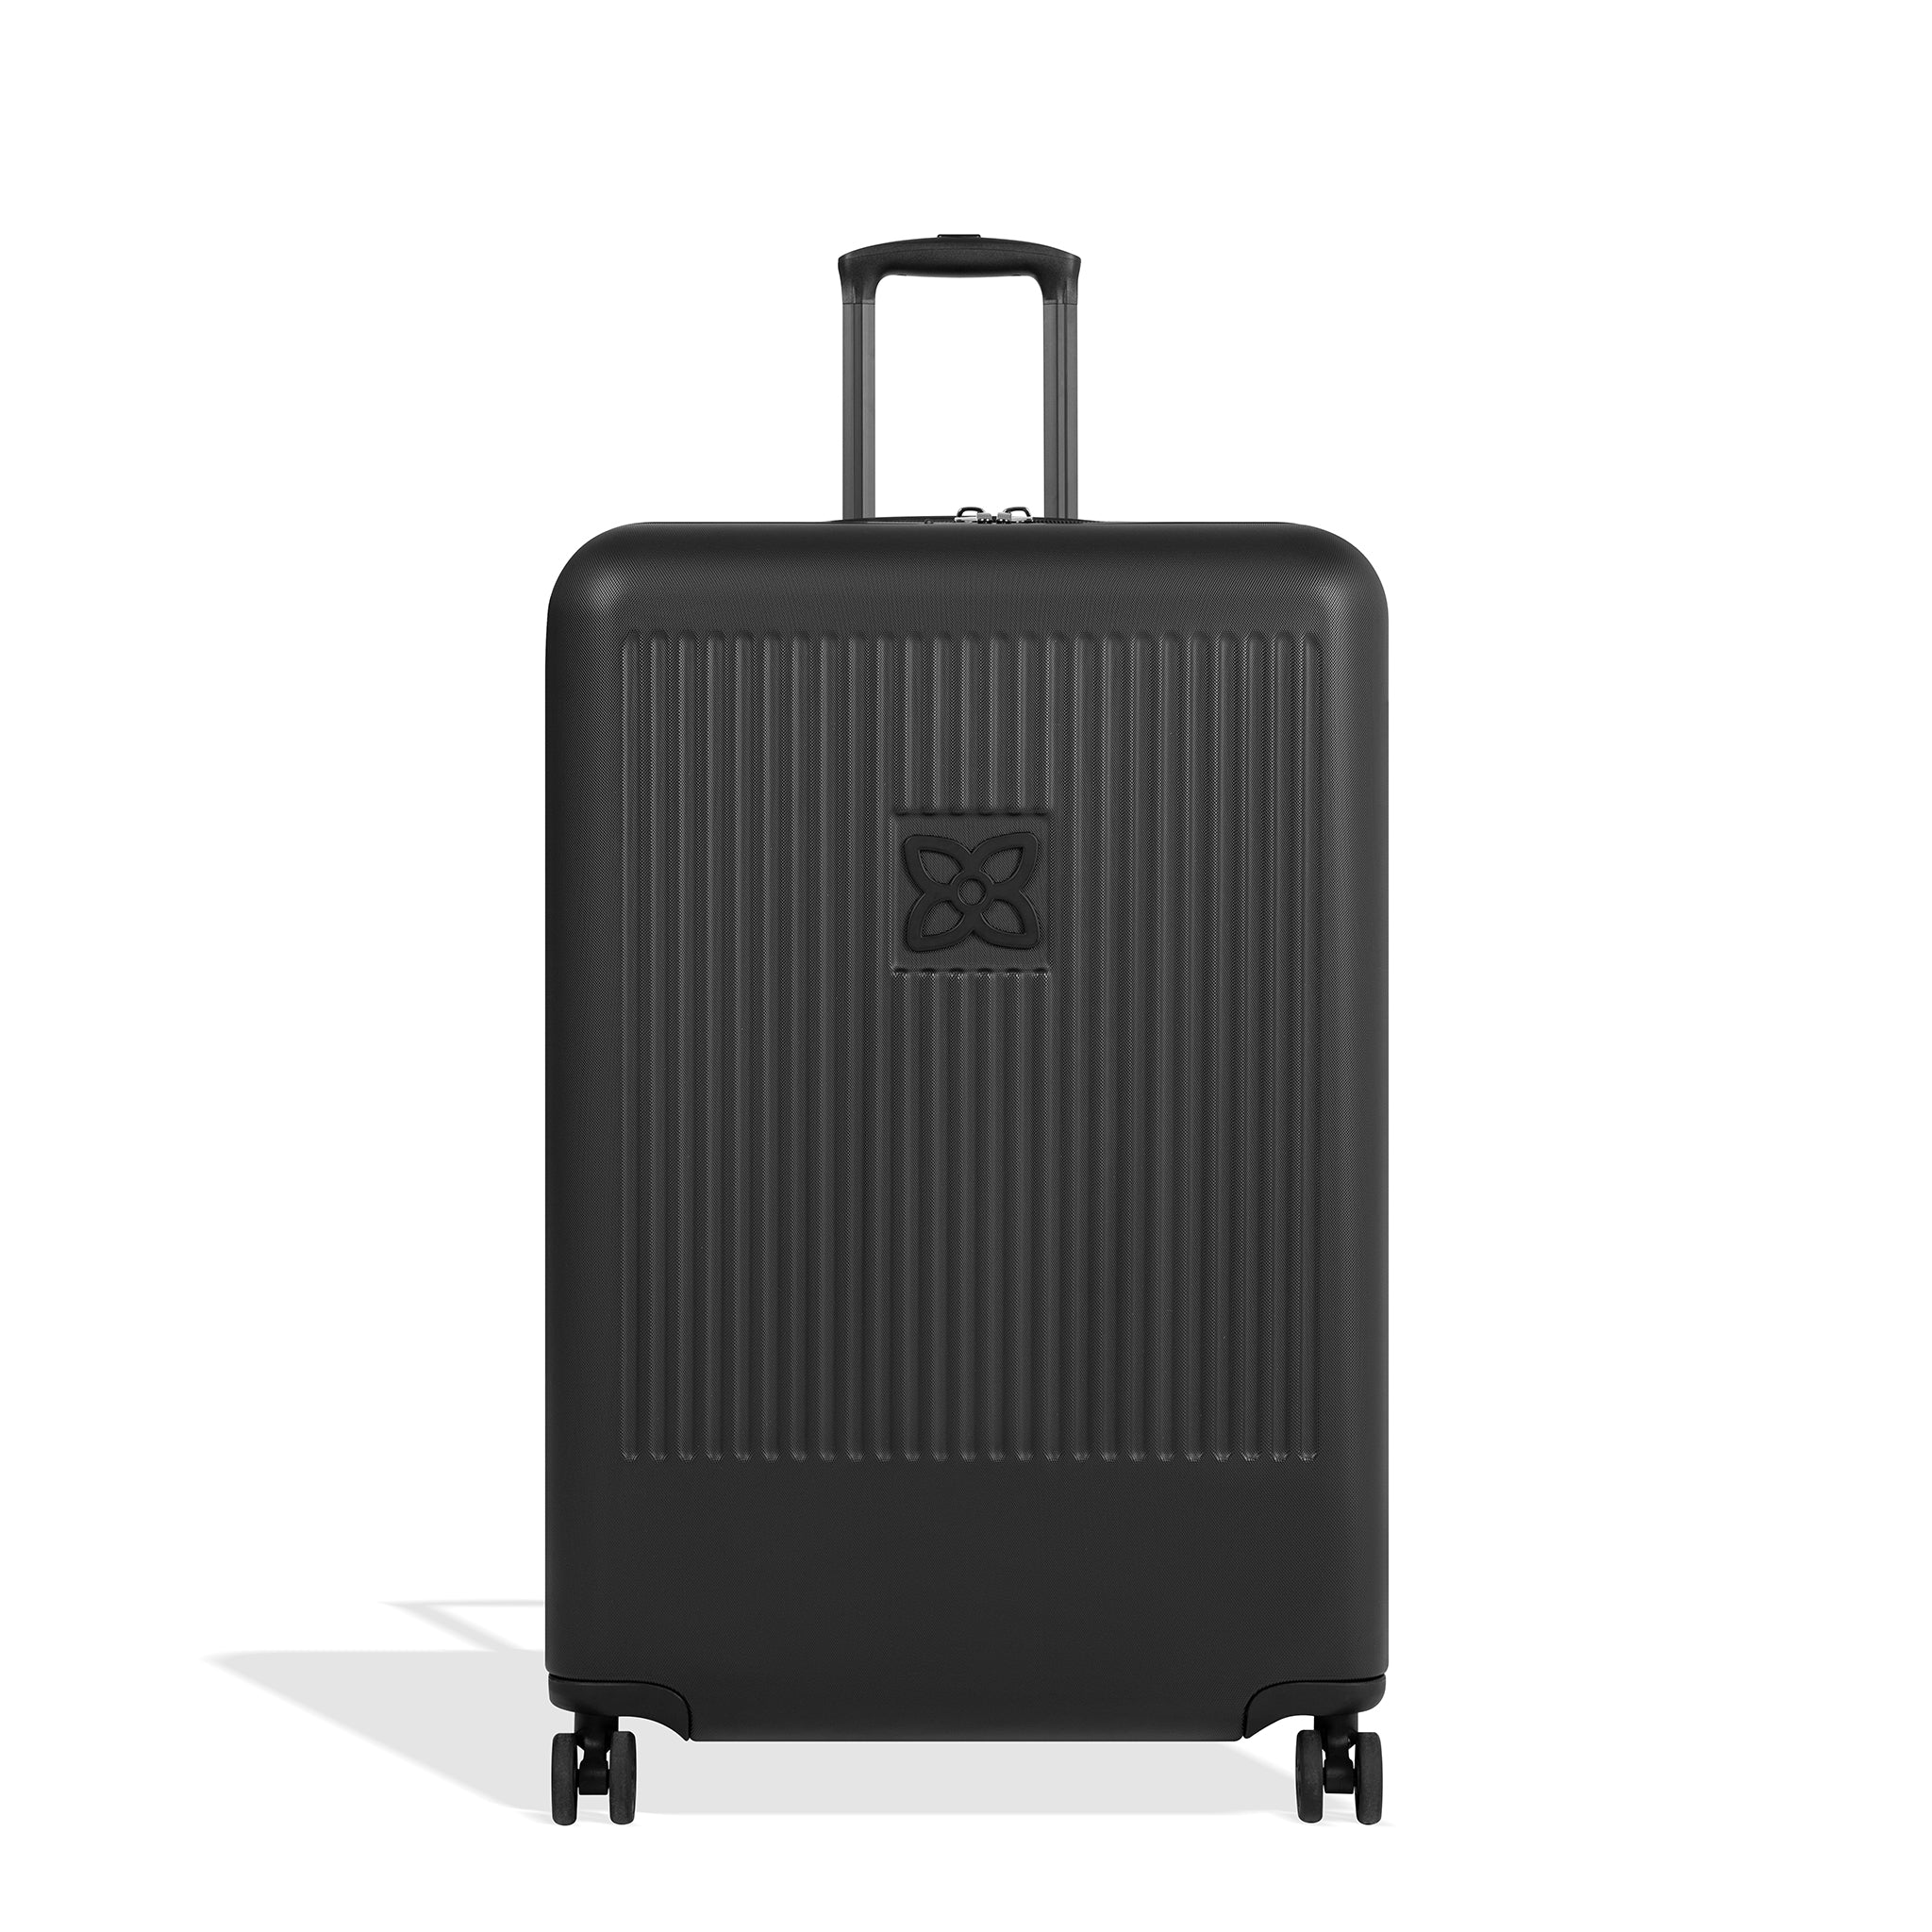 Flat front view of Sherpani hard-shell checked luggage, the Meridian in Black. Meridian features include a retractable luggage handle, uncrushable exterior, TSA-approved locking zippers and four 36-degree spinner wheels. 